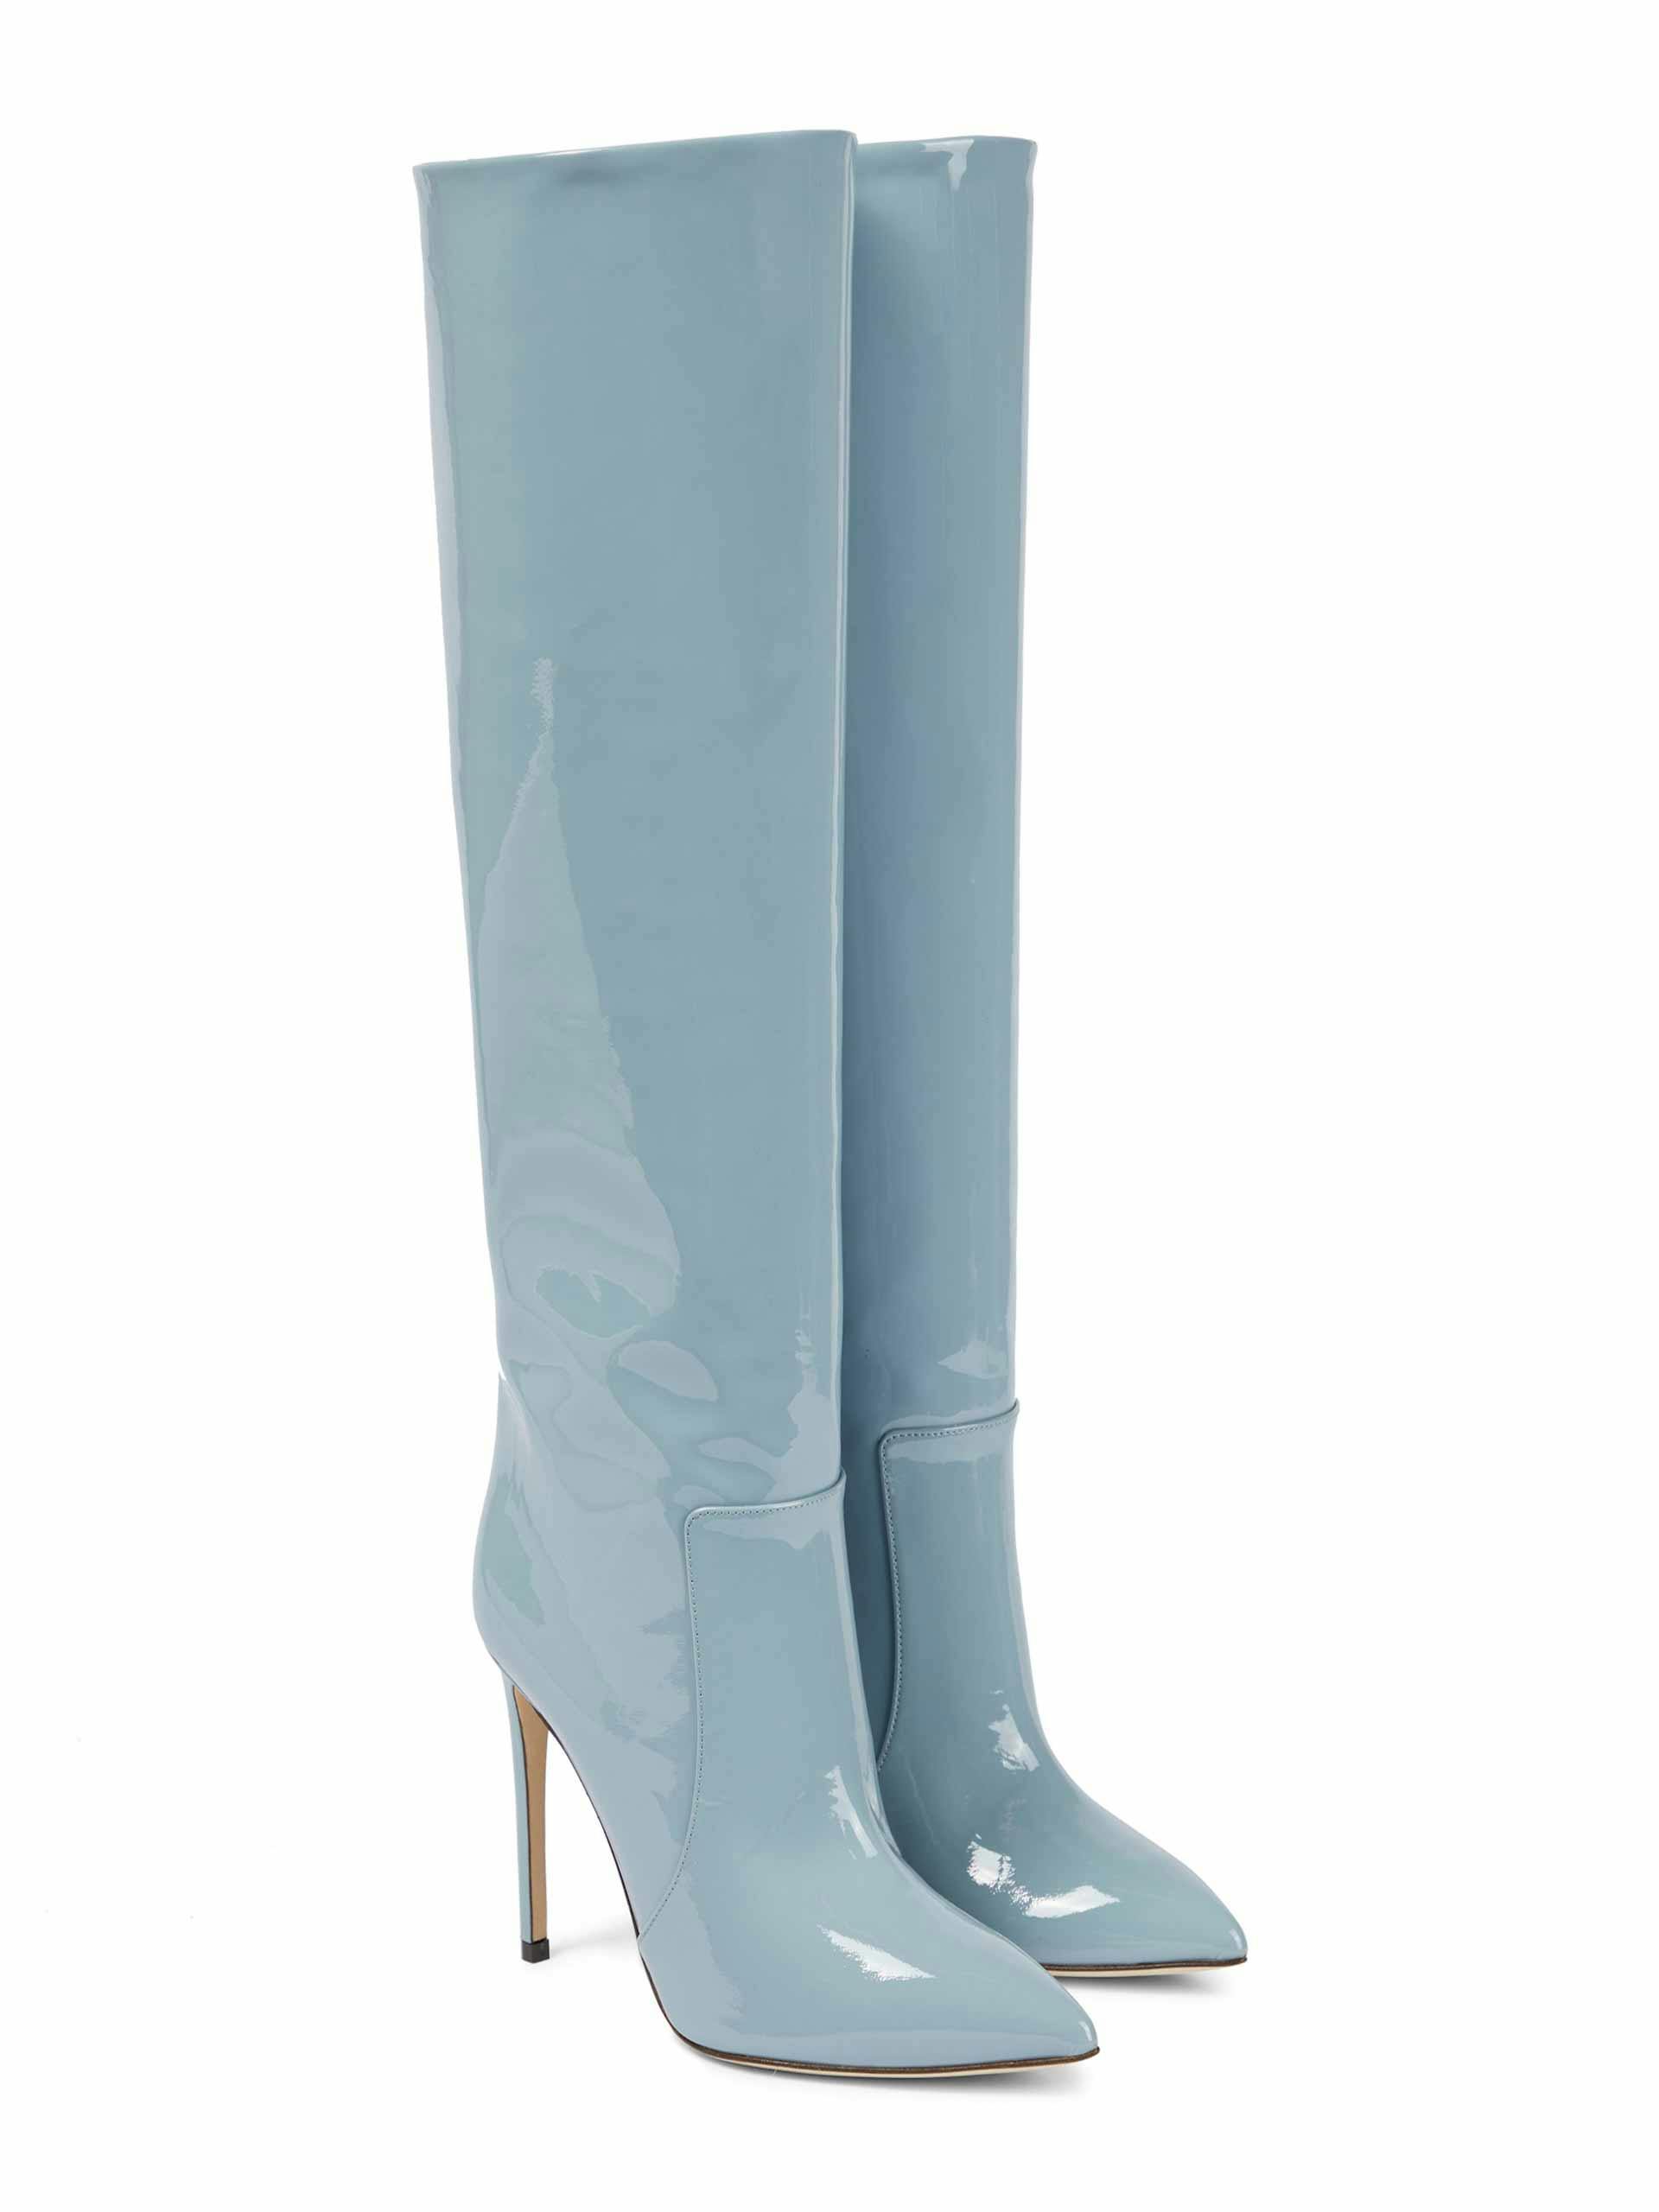 Baby blue patent leather knee high boots